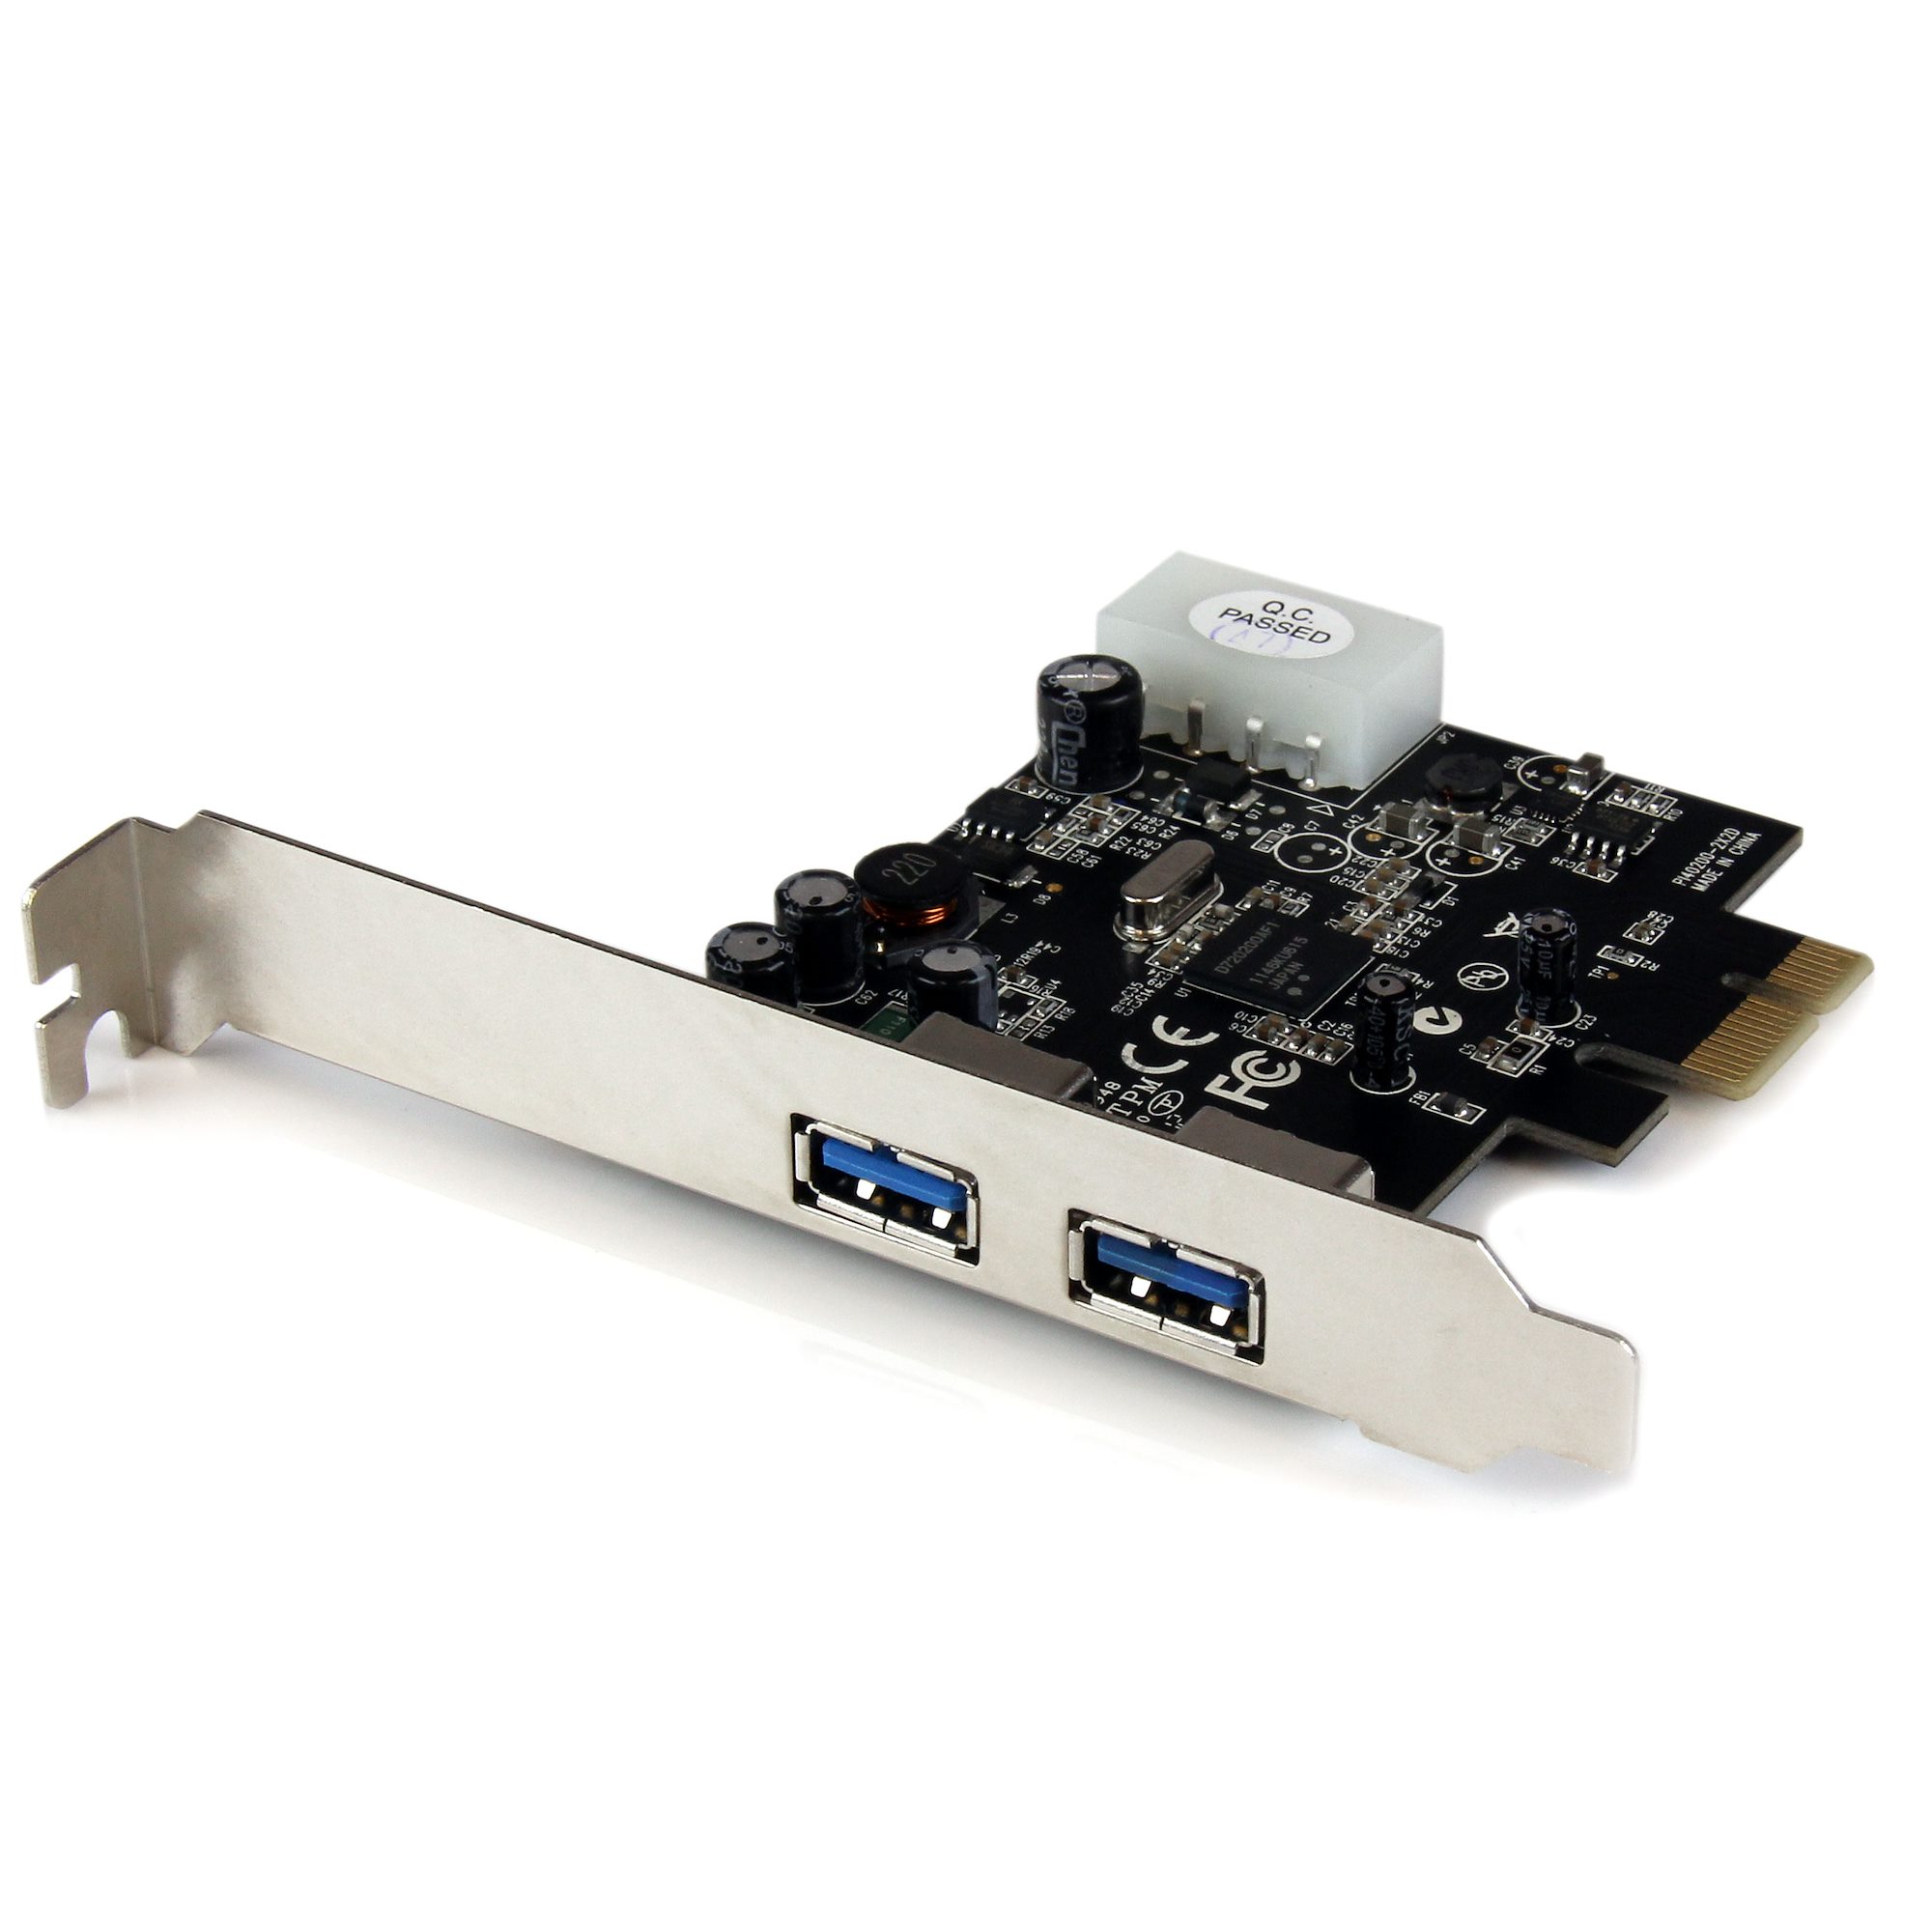 SIIG 2-Port Dual Profile PCIe Adapter with SuperSpeed USB 3.0 JU-P20612-S1 